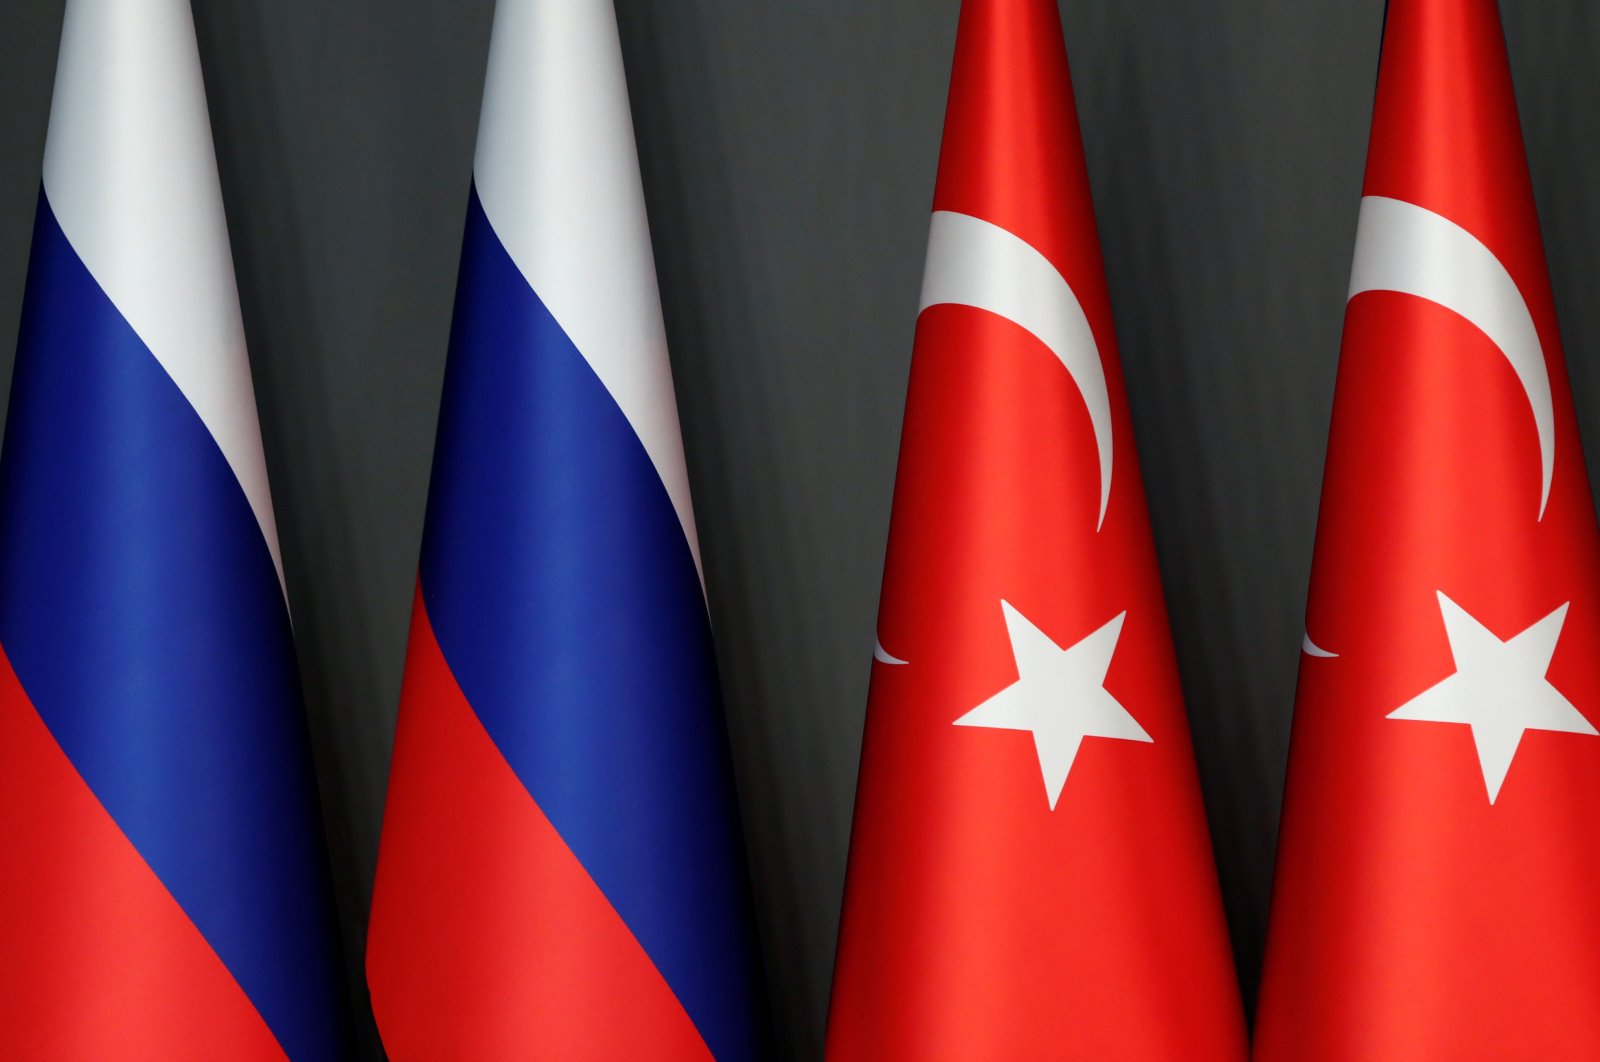 Flags of Turkey and Russia are seen ahead of a news conference after a Syria summit, in Istanbul, Turkey, Oct. 27, 2018. (Reuters File Photo)